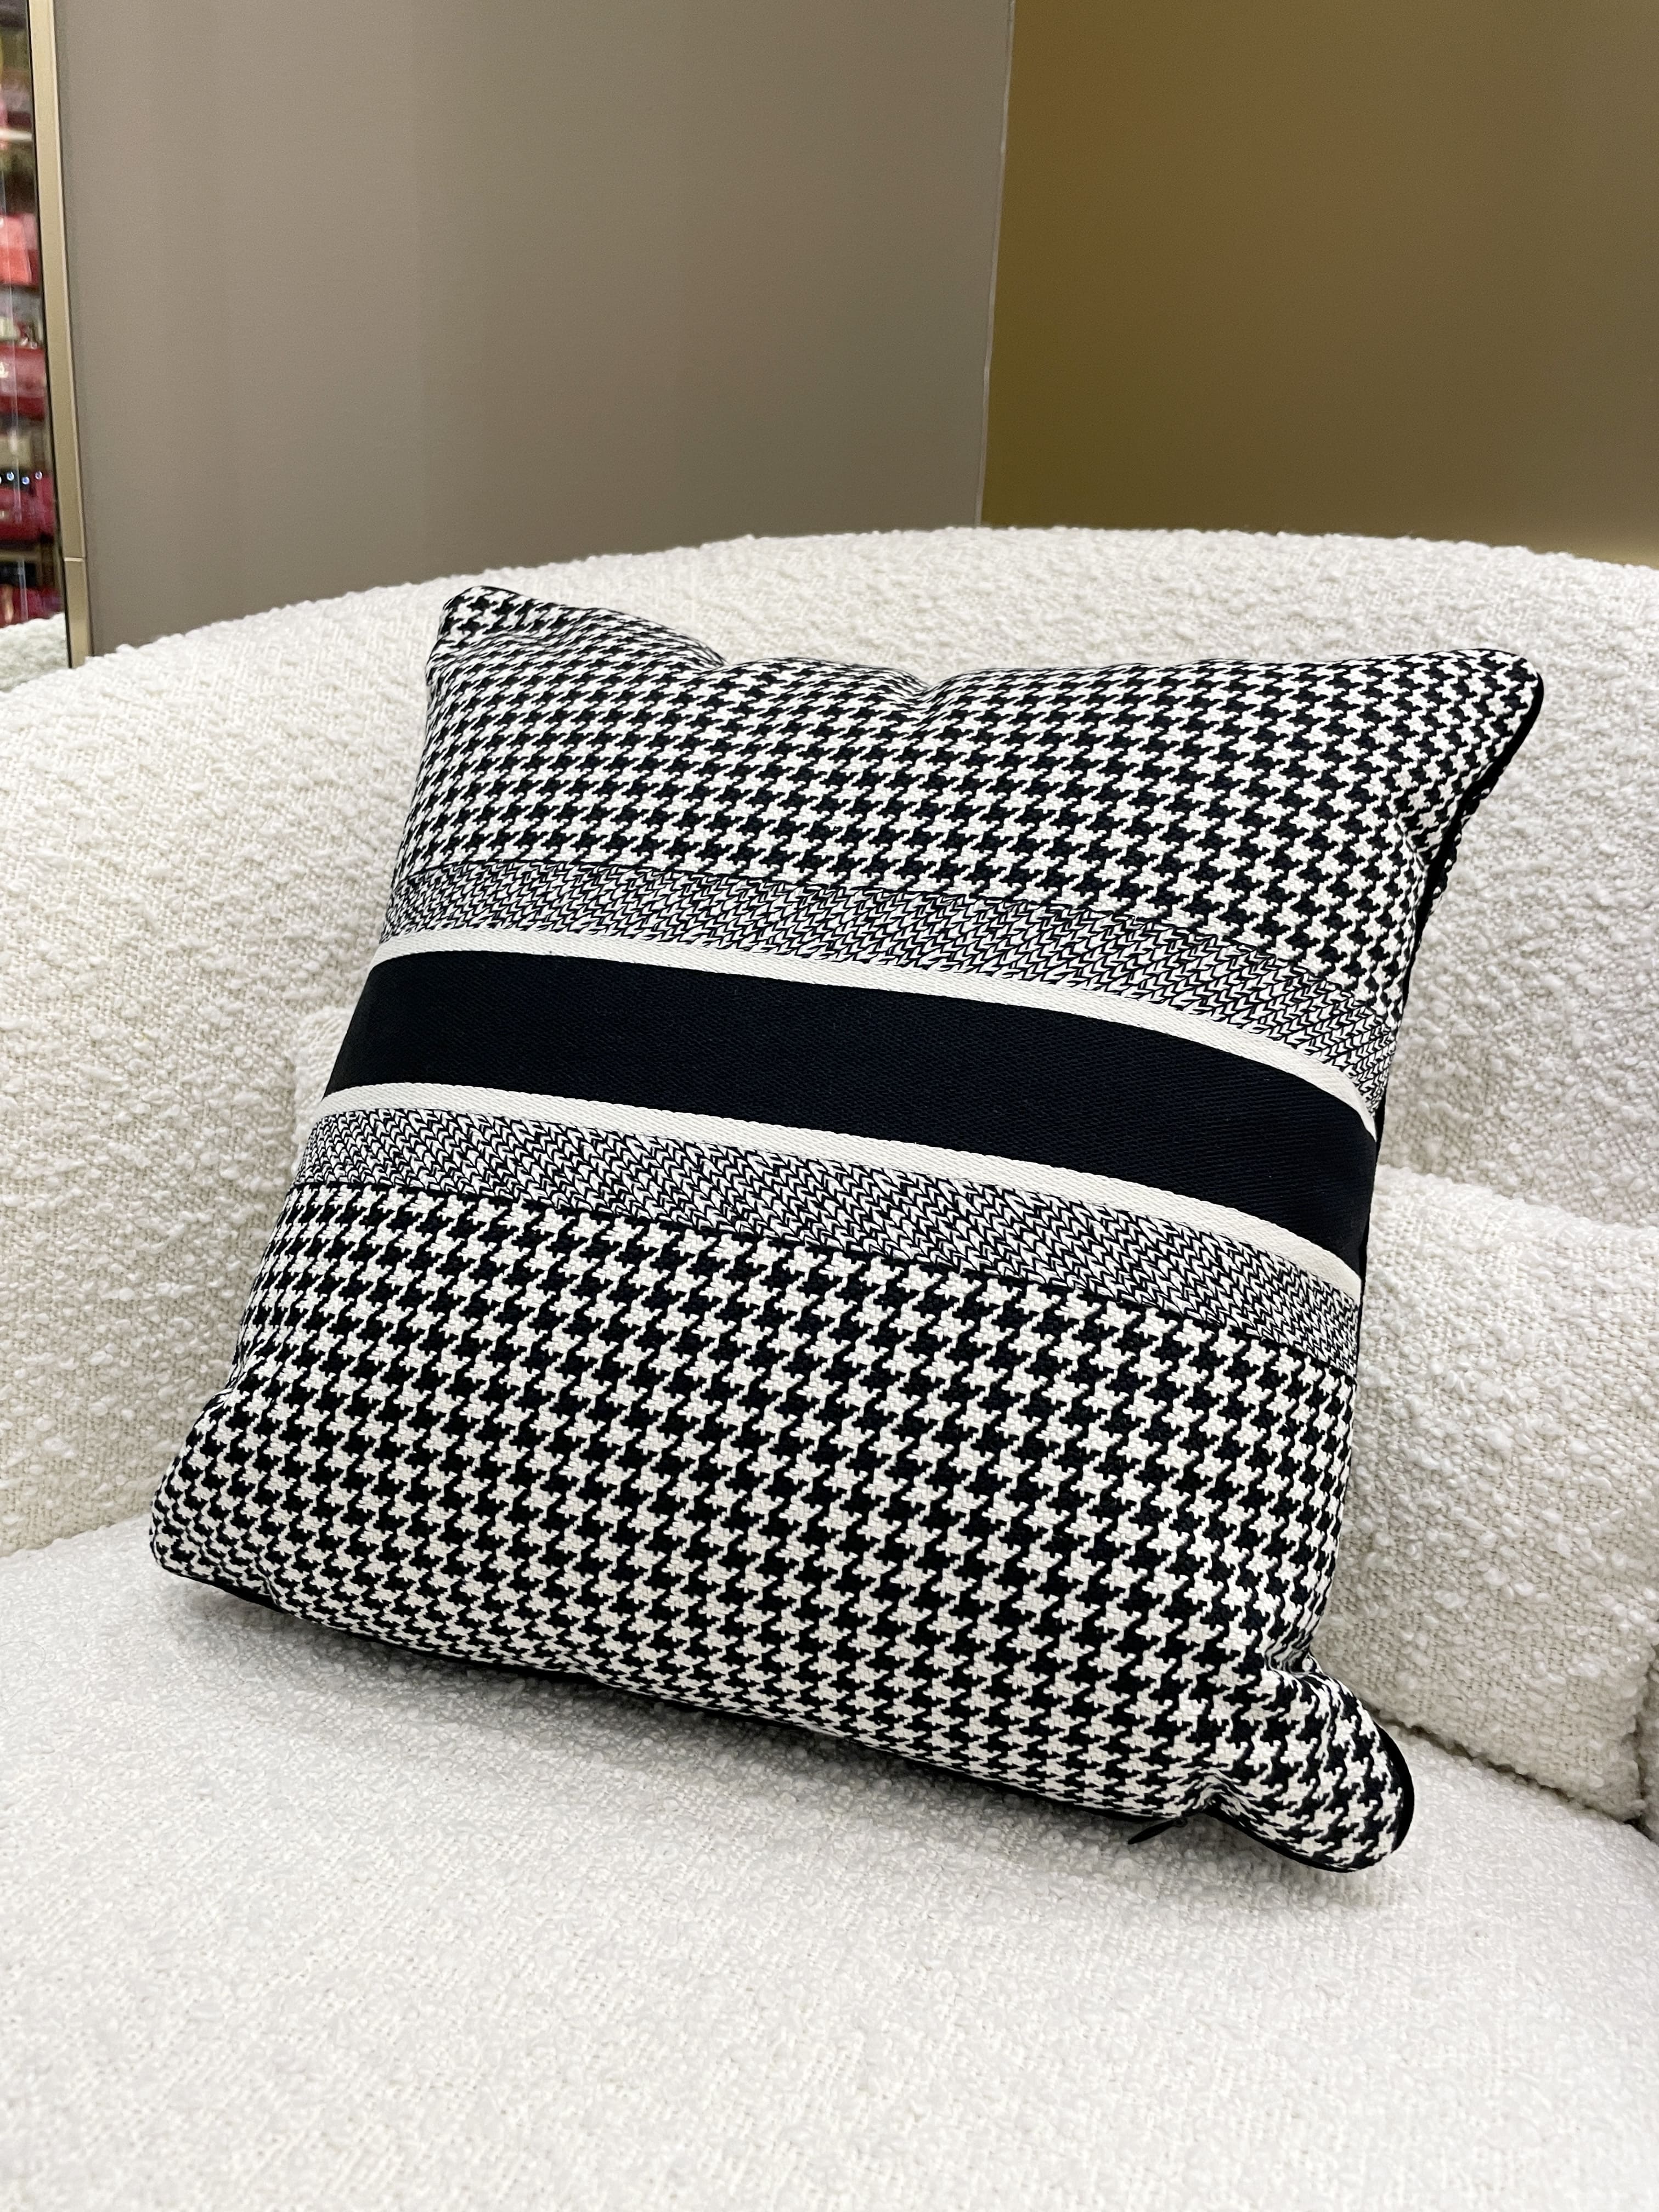 Dior Square Pillow Black/ White Houndstooth